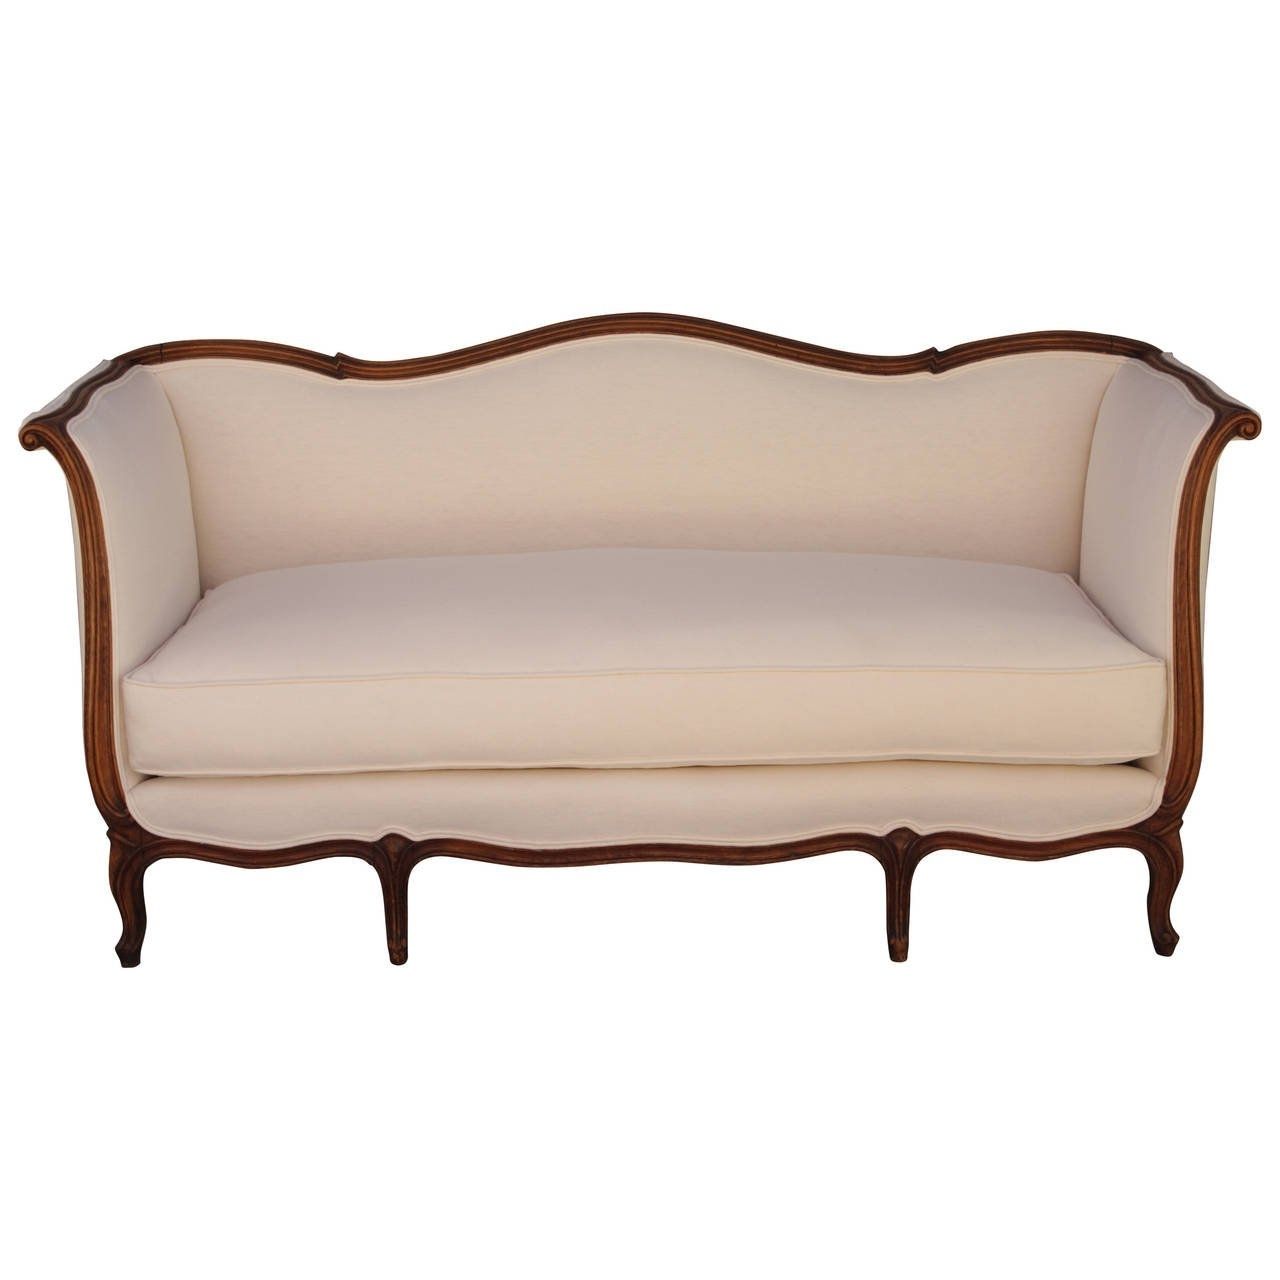 Well Known French Style Sofas In French Louis Xv Style Sofa With Linen Upholstery At 1stdibs (View 5 of 20)